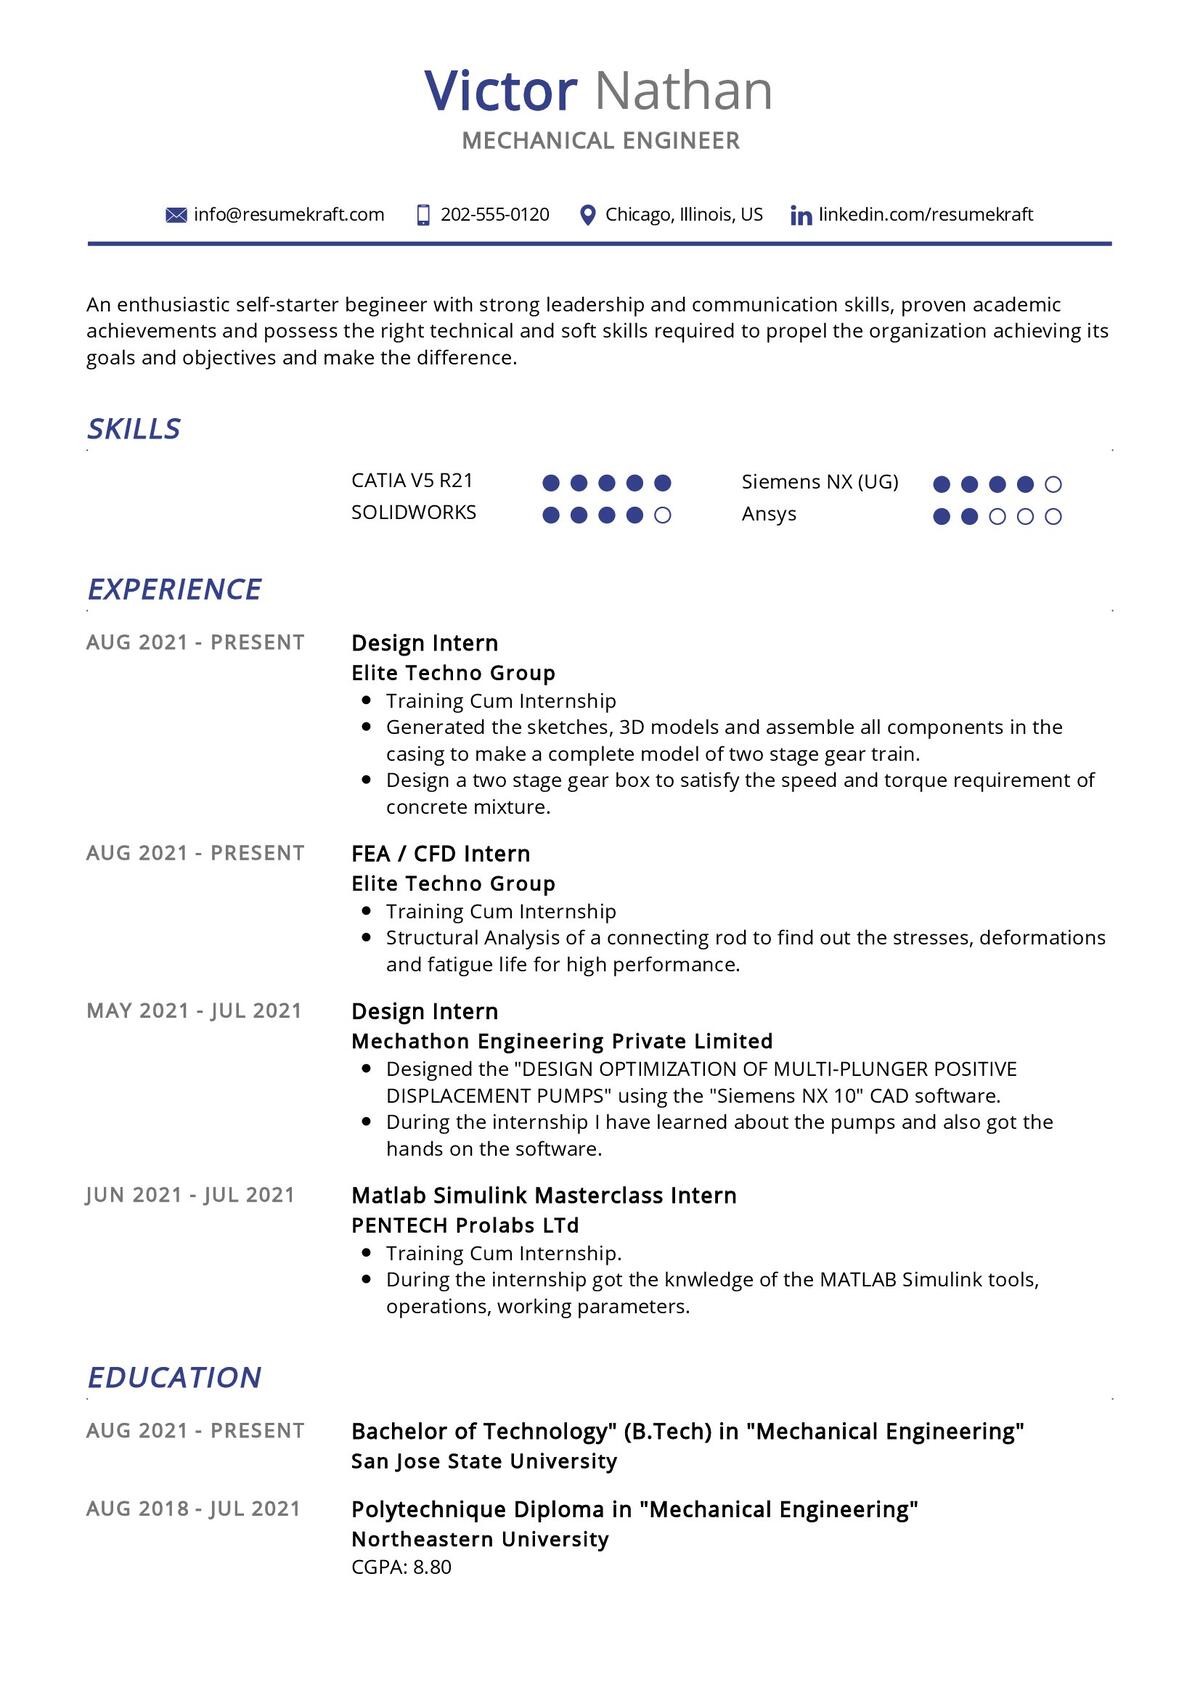 how to write a resume for a fresher mechanical engineer